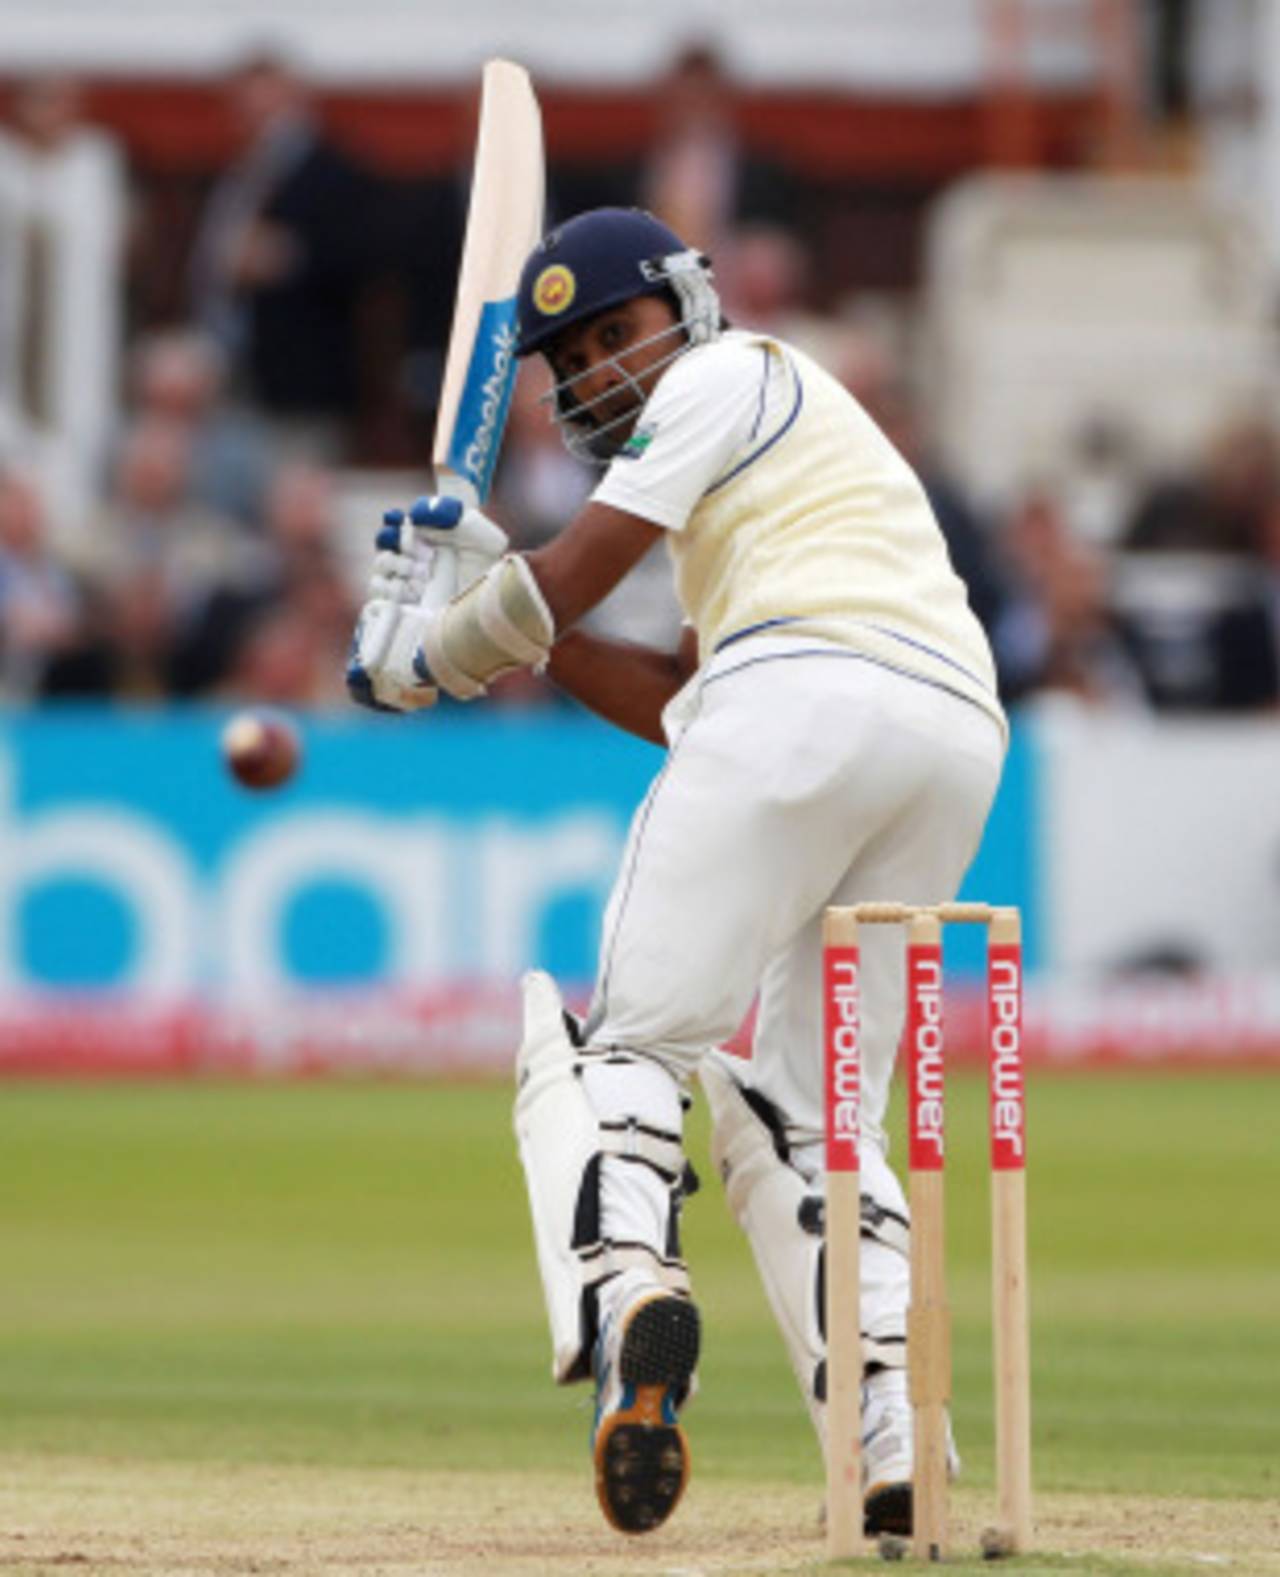 Mahela Jayawardene believes he batted quite well in his third Lord's appearance, though he could not add to his two centuries at the venue&nbsp;&nbsp;&bull;&nbsp;&nbsp;Getty Images